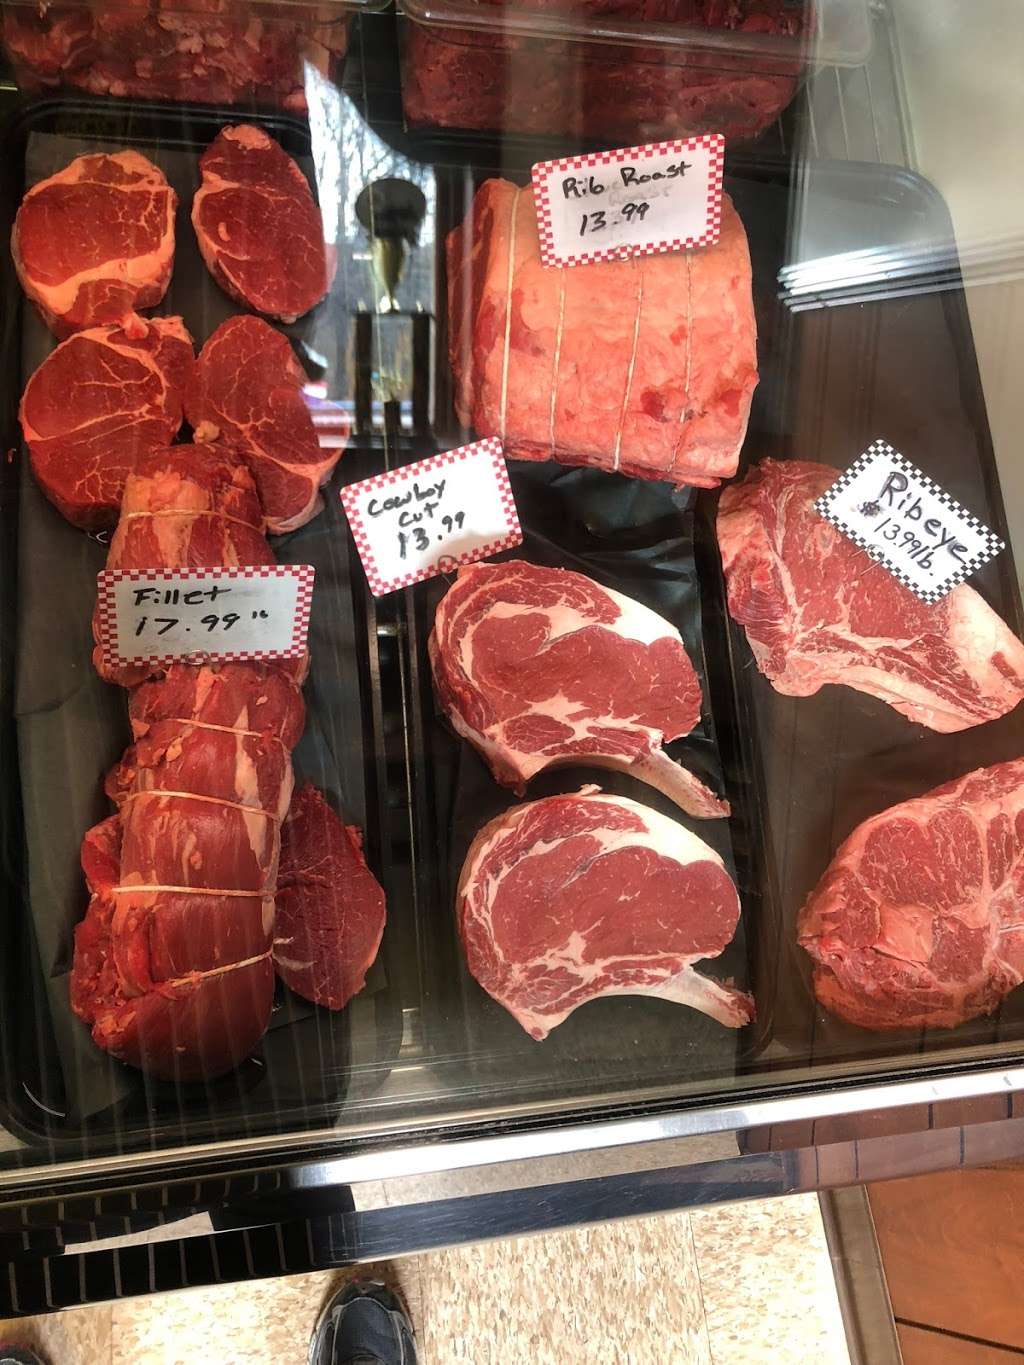 Appel Valley Butcher Shop | 531 Beaver Valley Pike, Lancaster, PA 17602, USA | Phone: (717) 947-4241